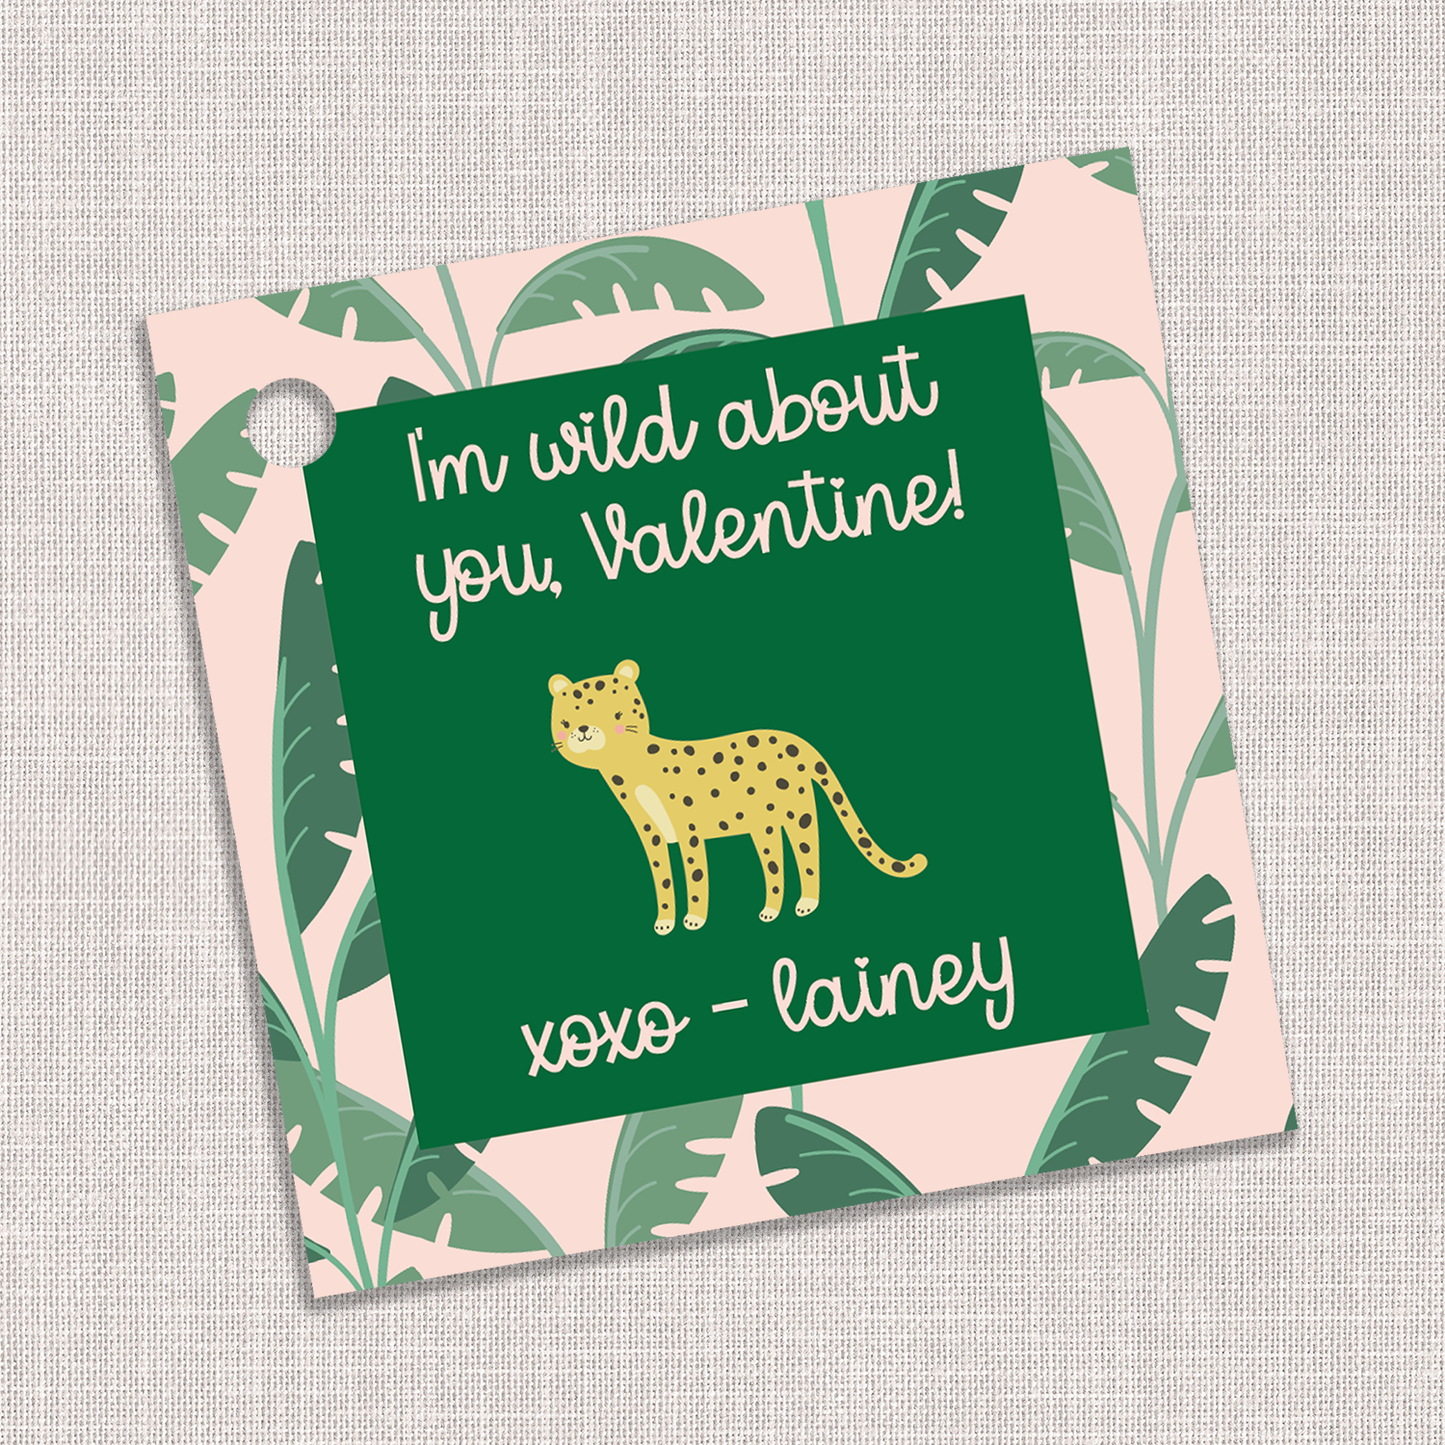 Our "I'm Wild About You, Valentine!" gift tag features a leopard and jungle print - tie to a toy animal or leopard print toy for the cutest school valentine's party favor. 